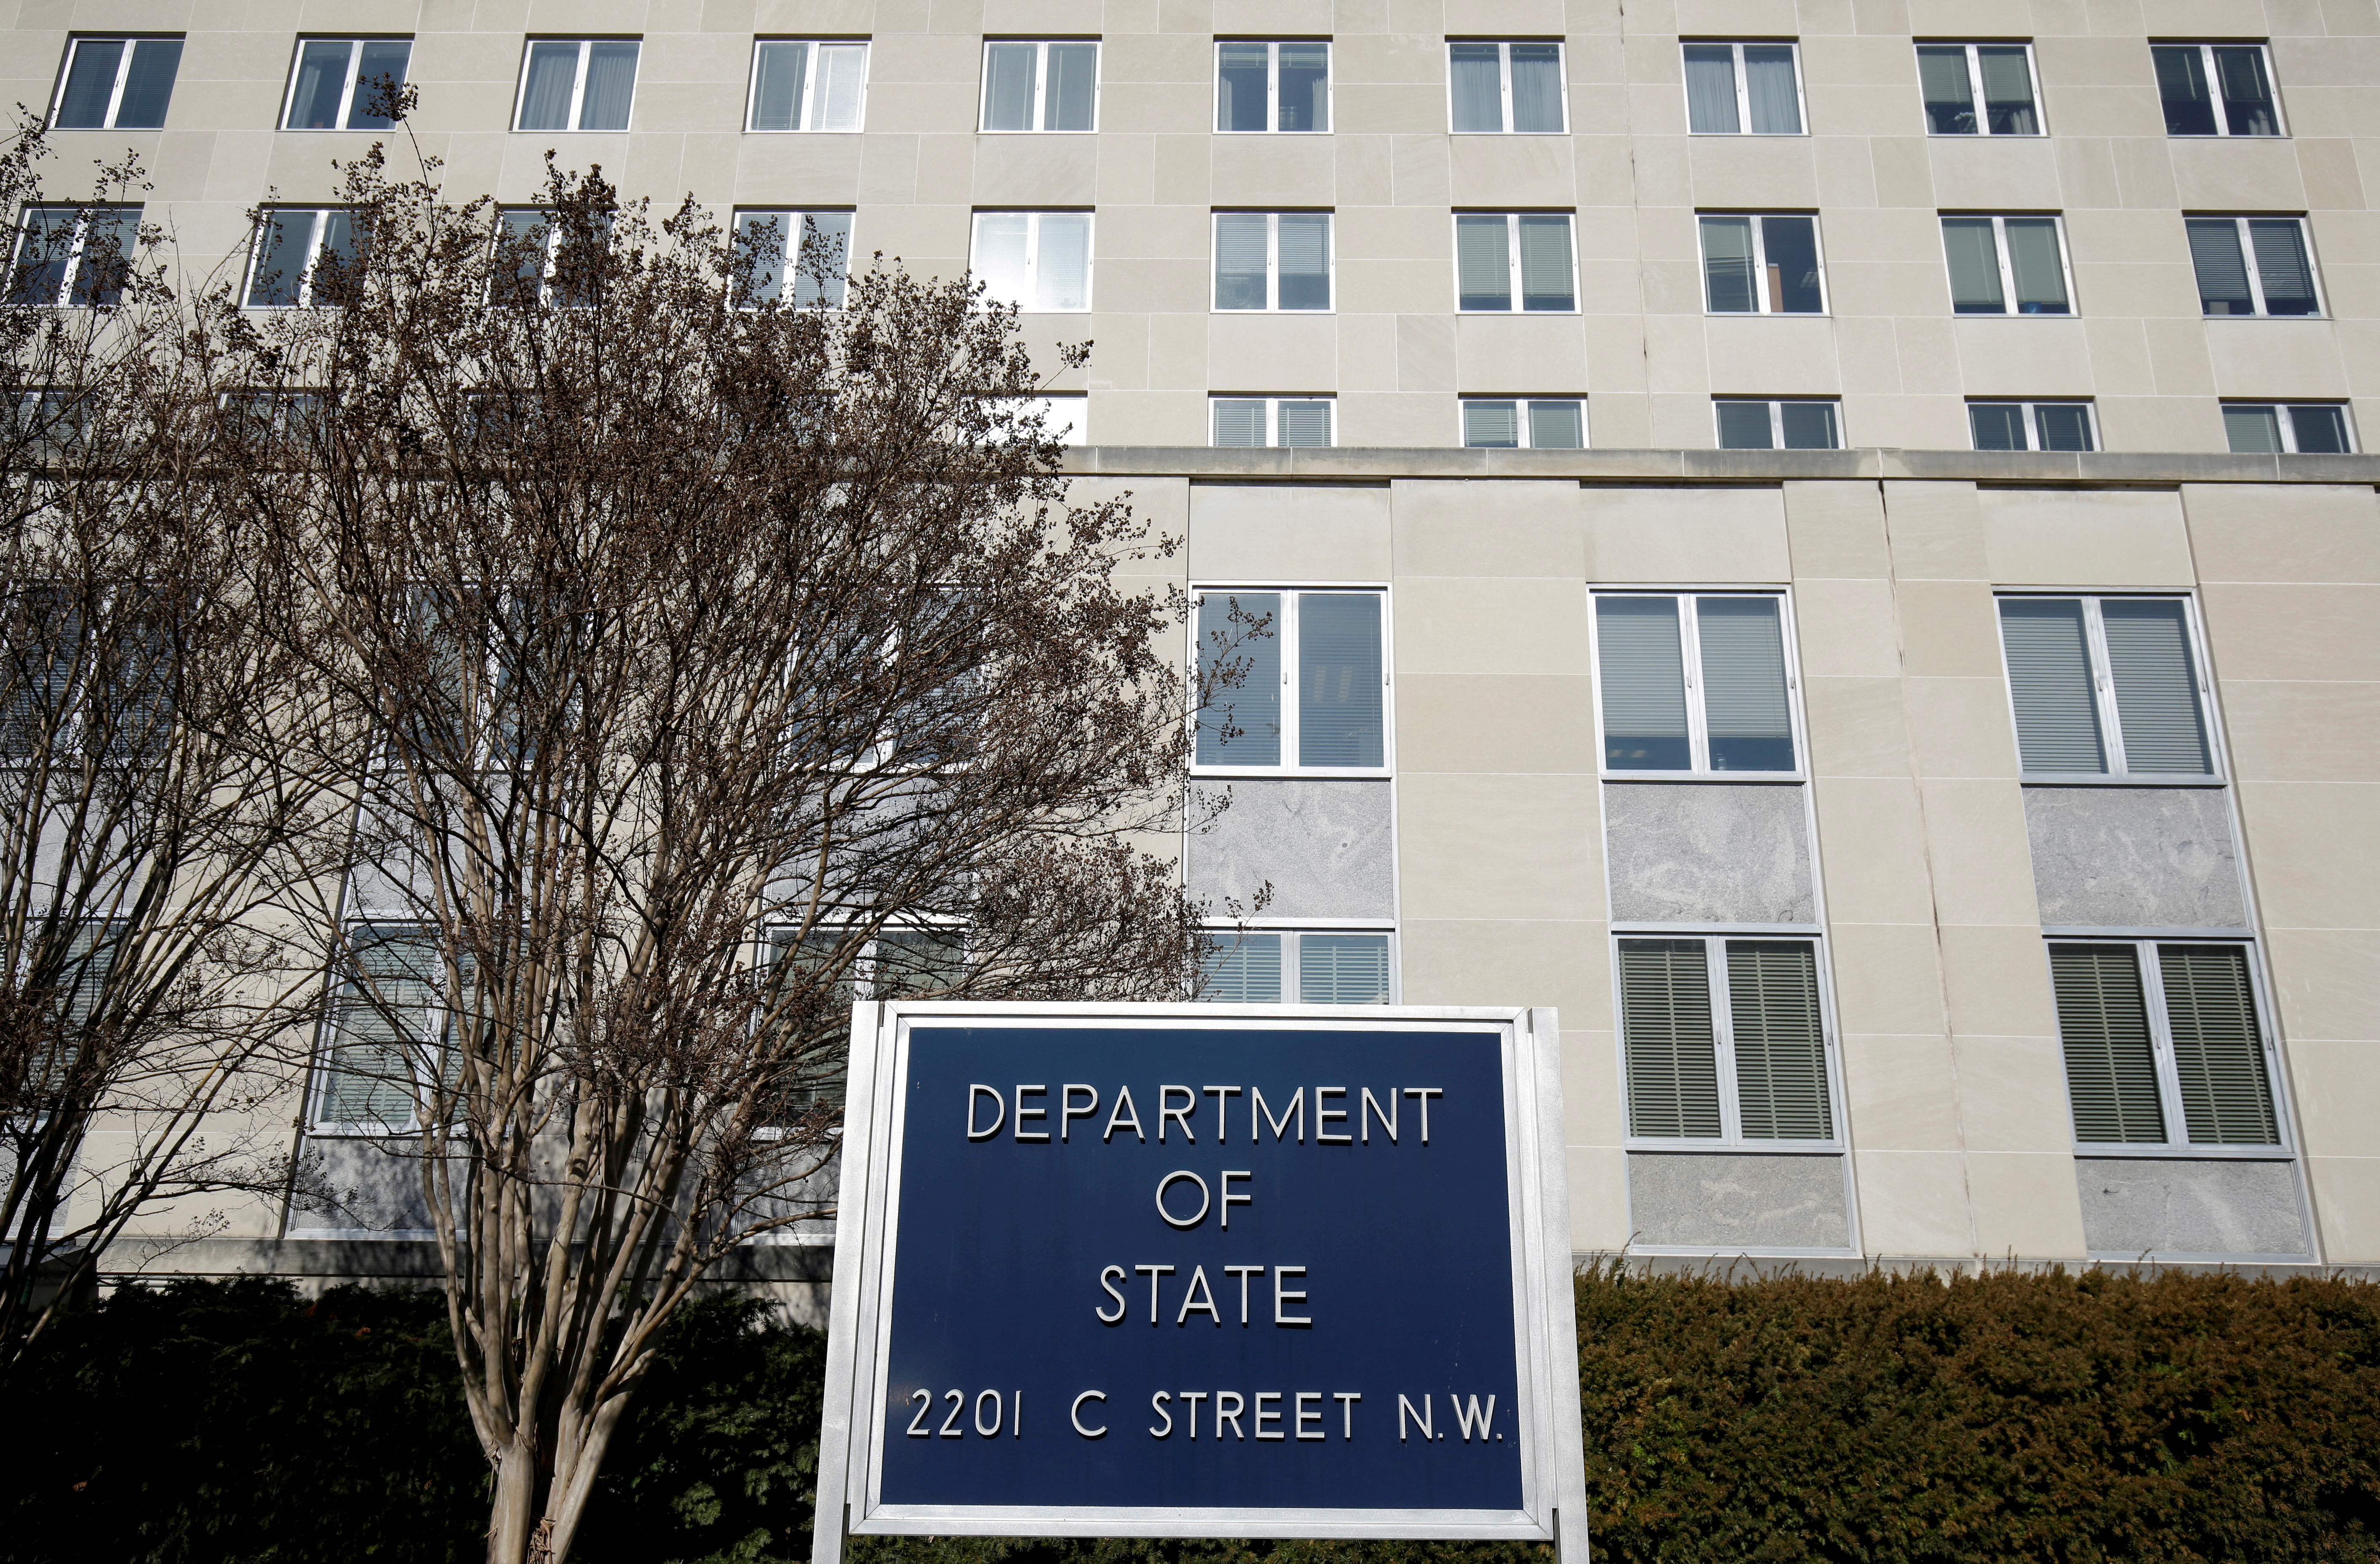 The State Department Building is pictured in Washington